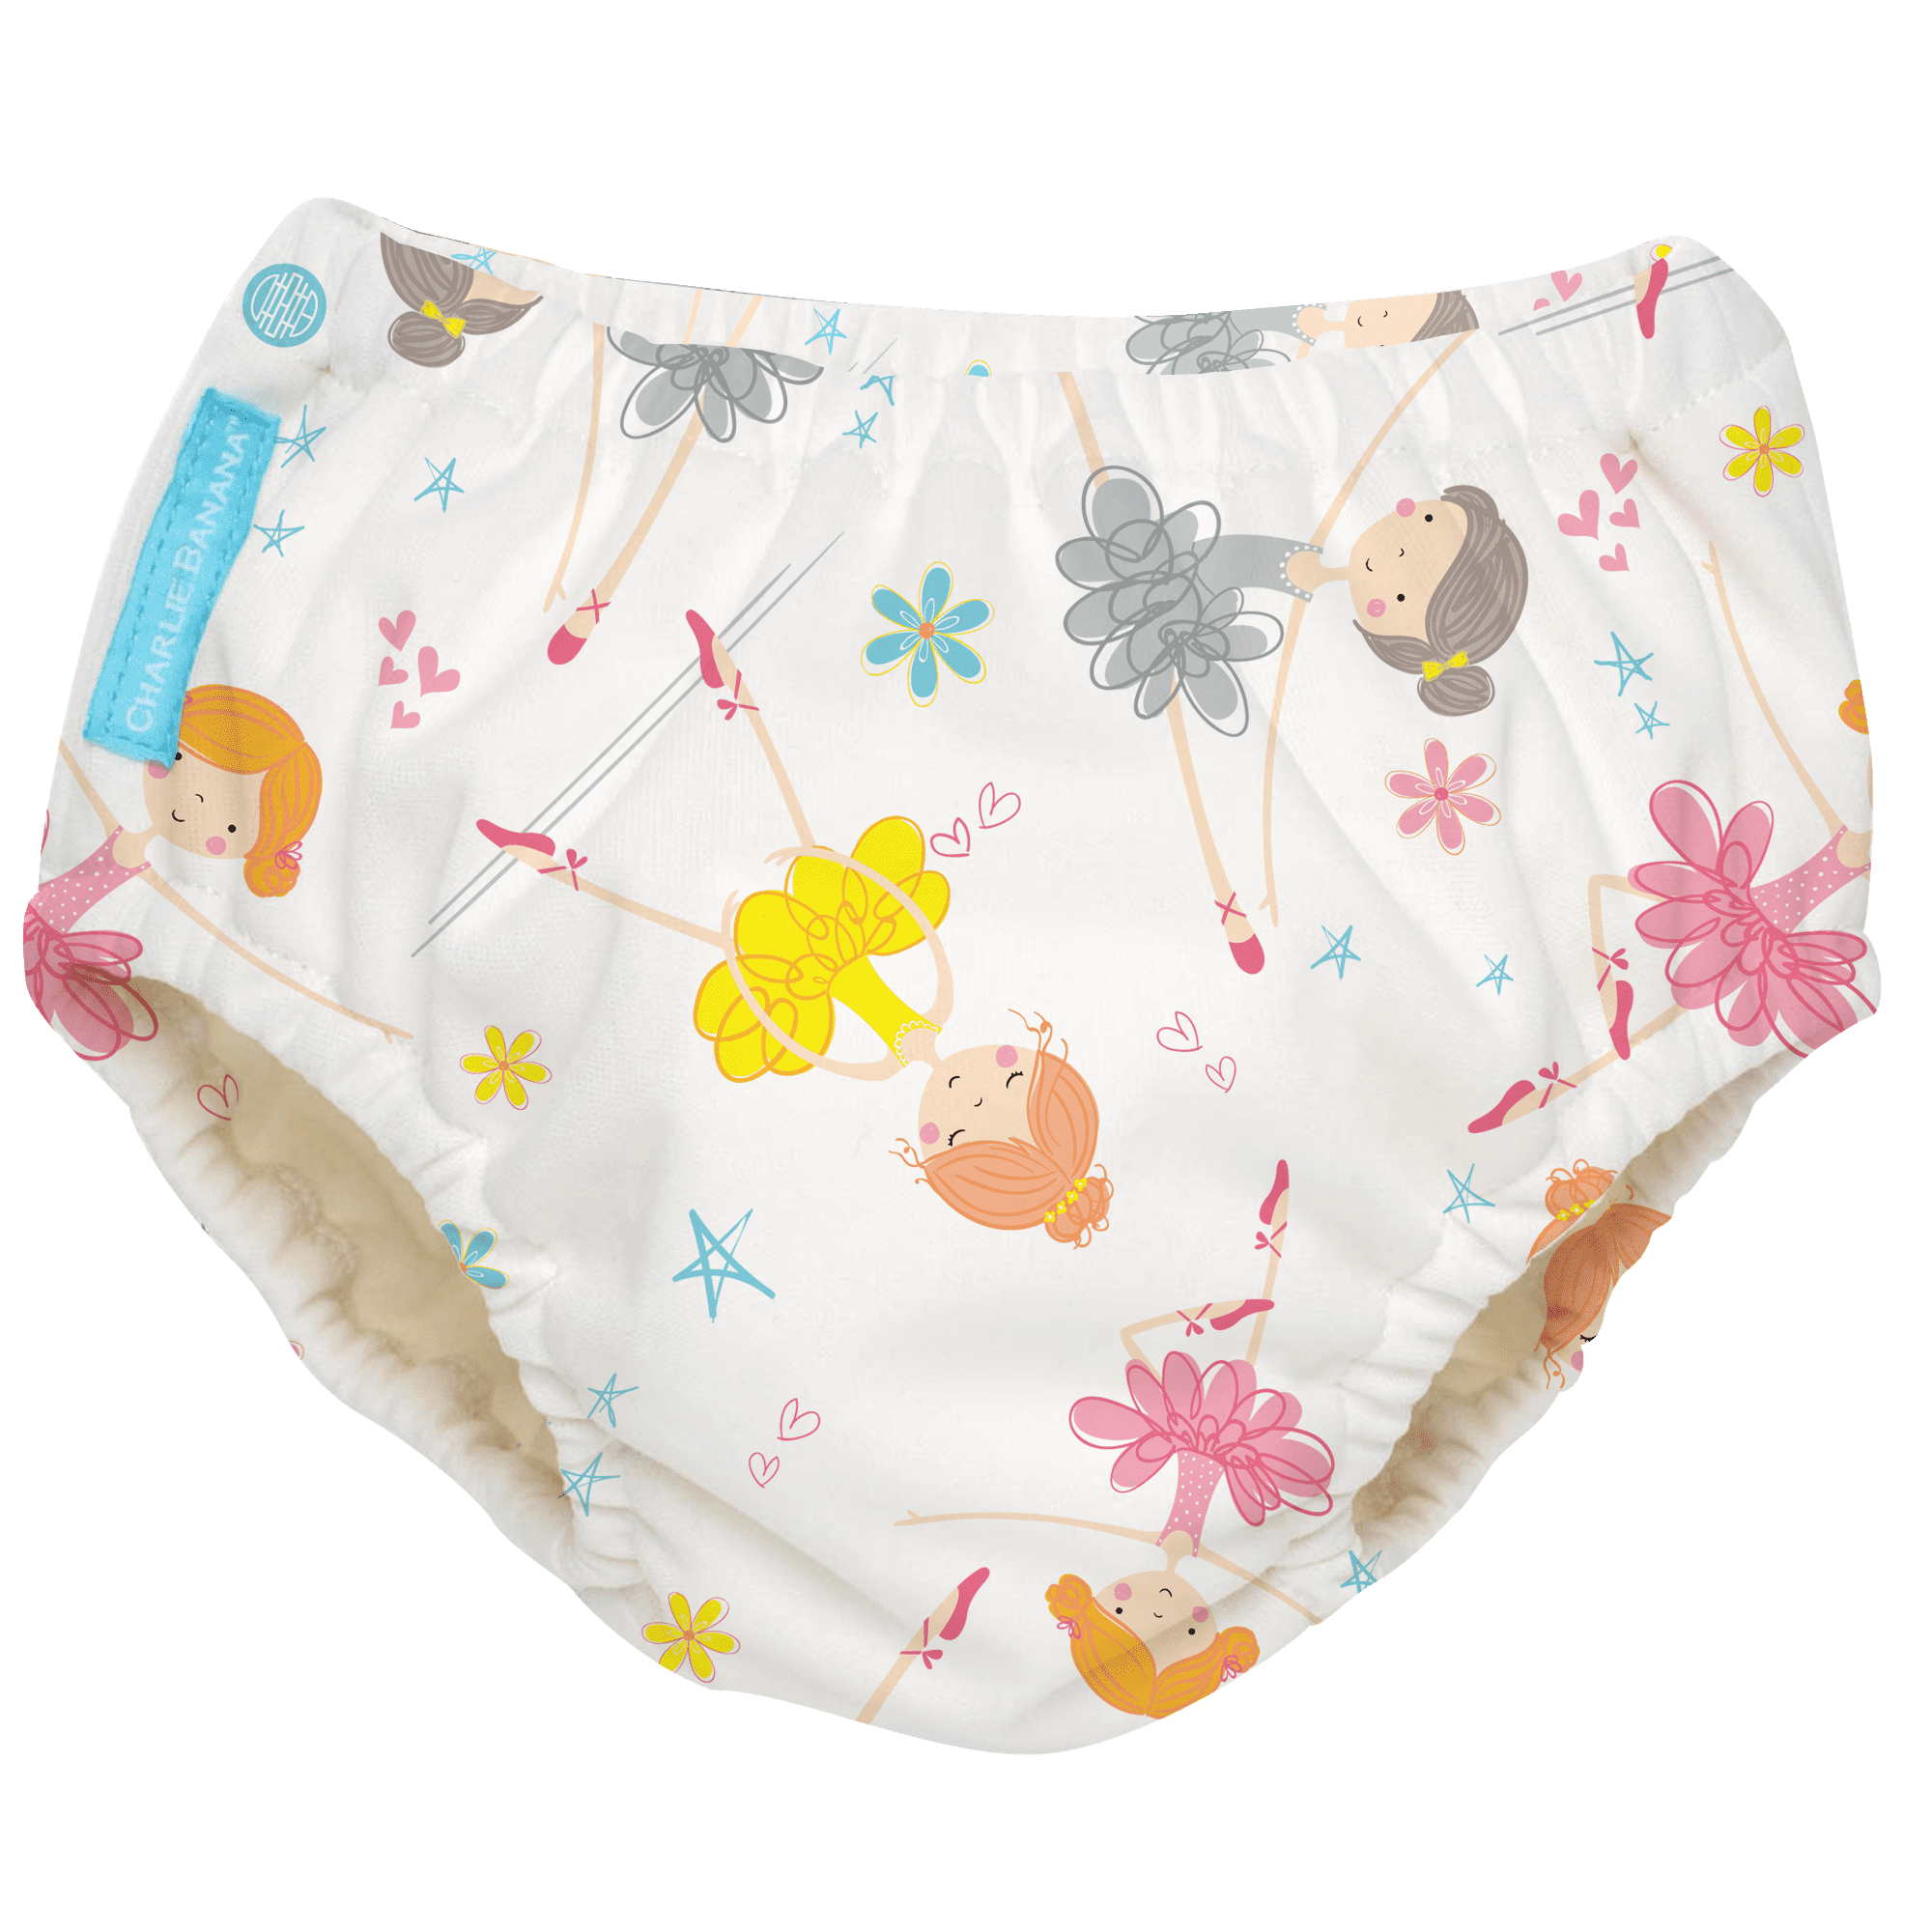 Medium Construction Charlie Banana Baby Easy Snaps Reusable and Washable Swim Diaper for Boys or Girls 